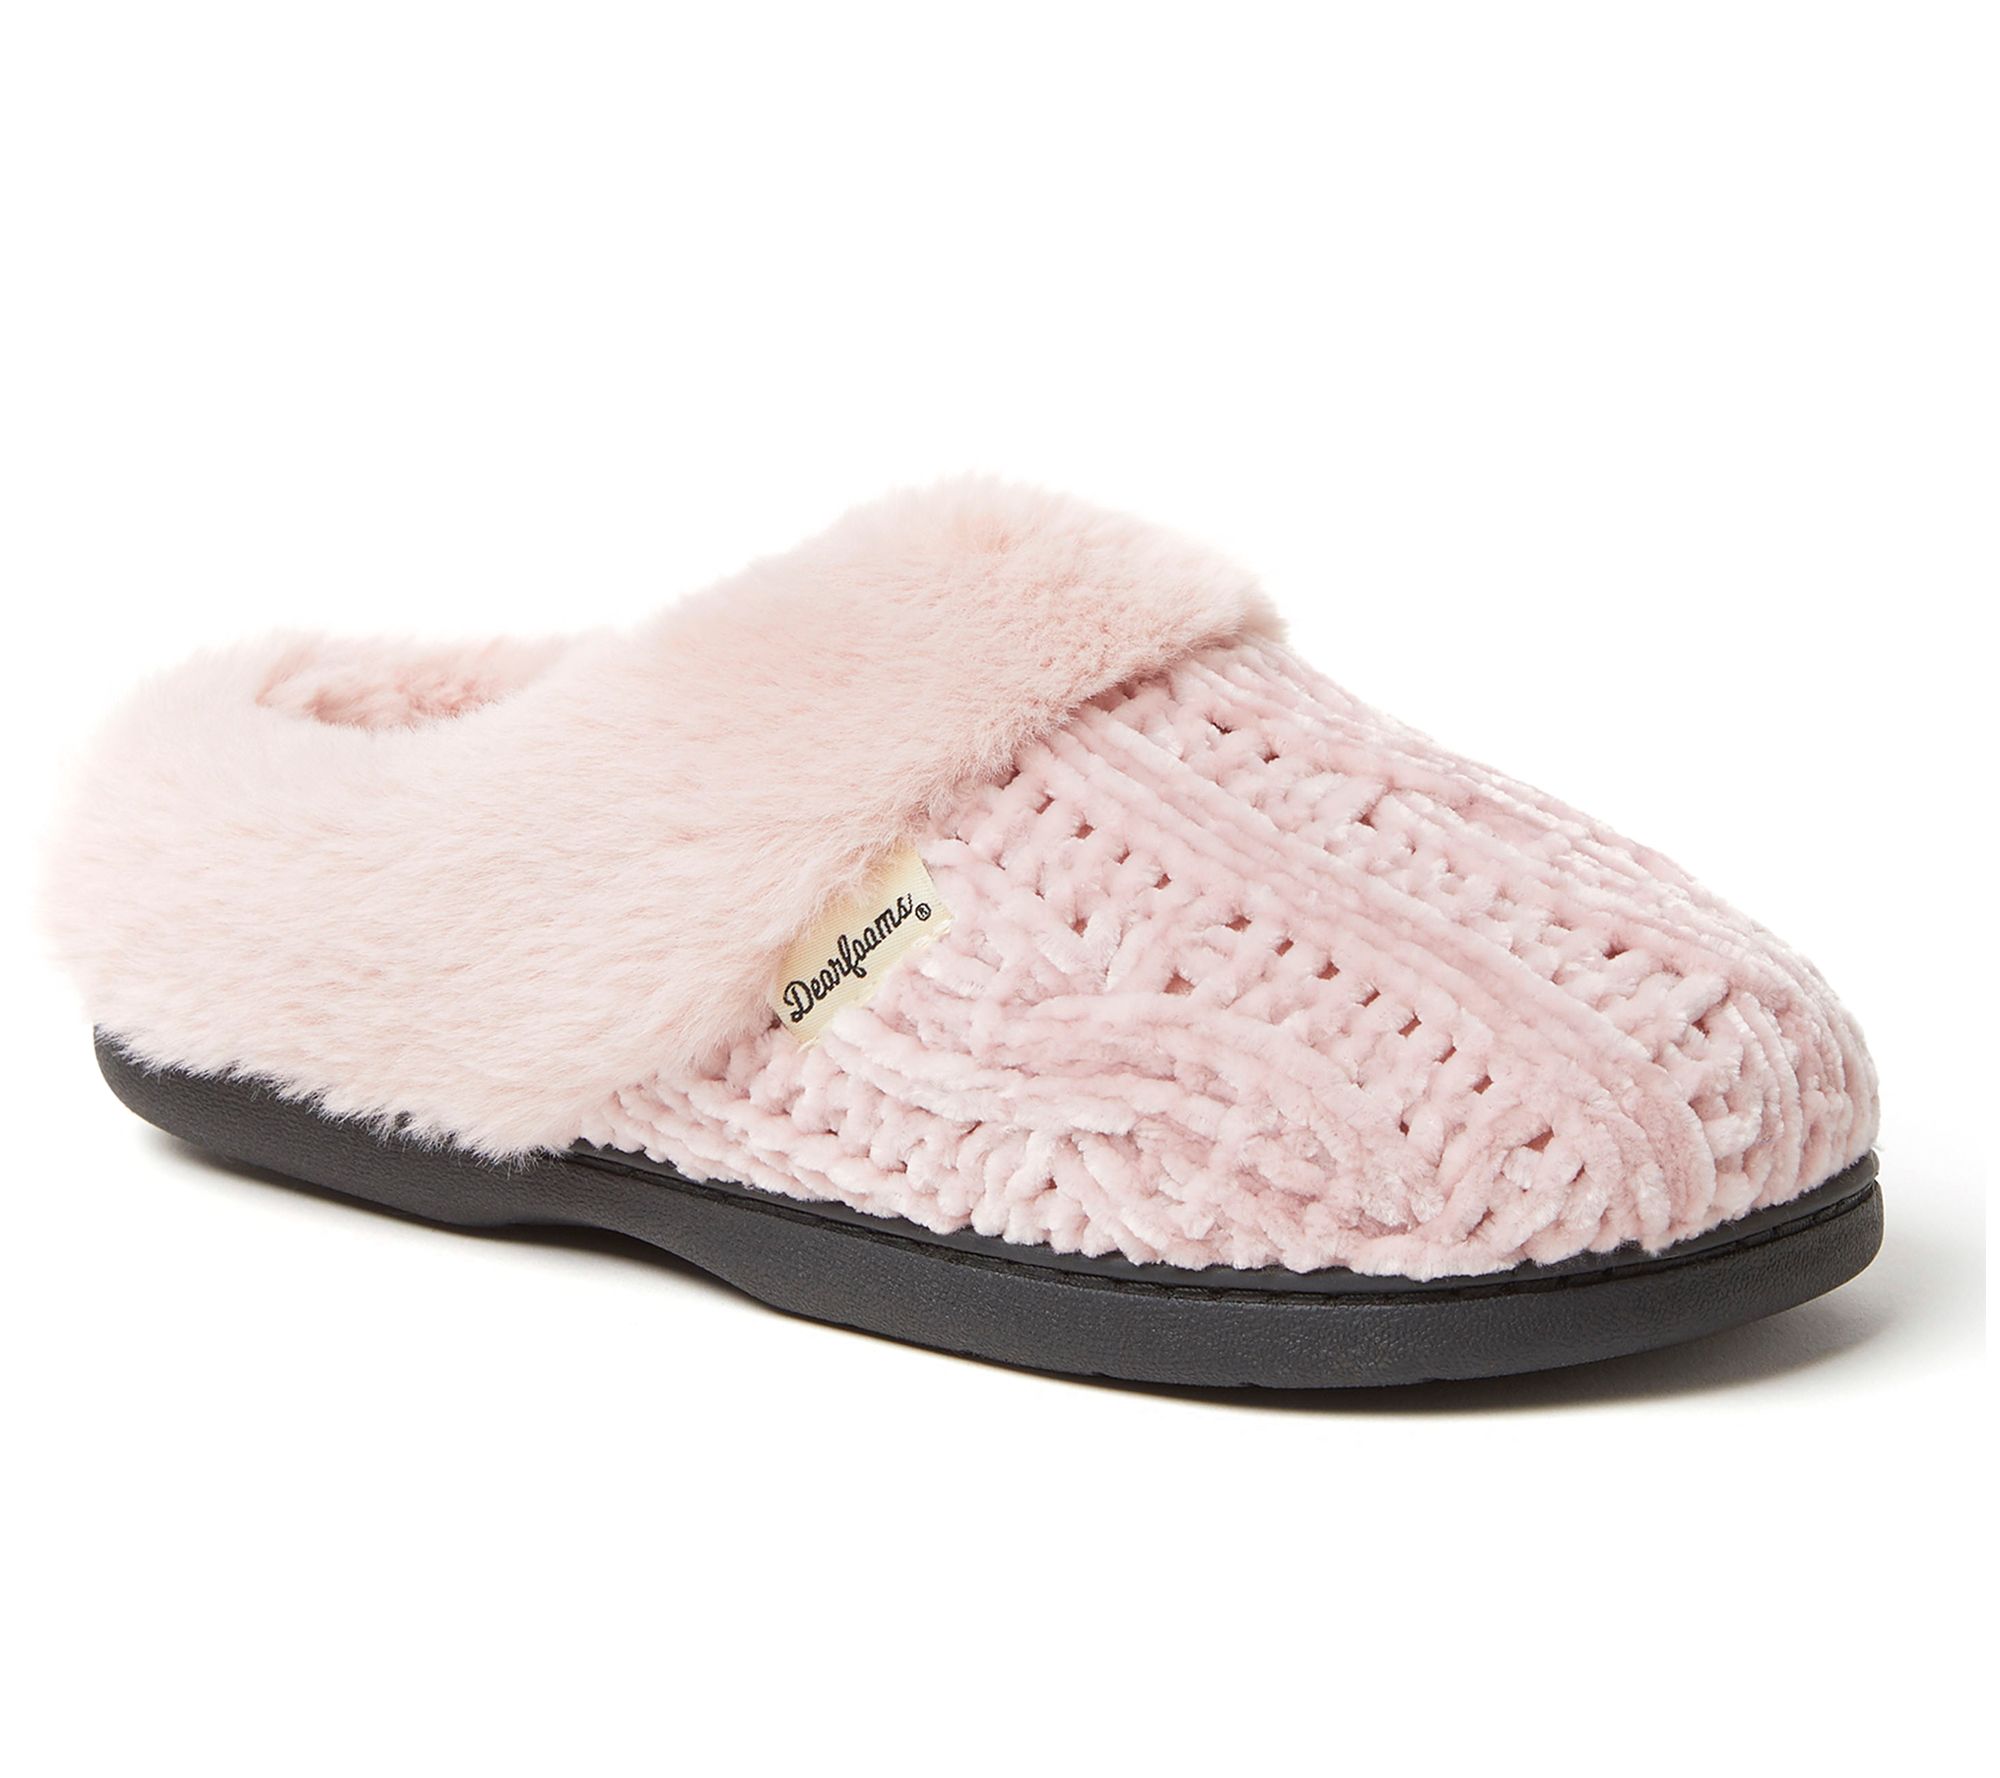 Dearfoams Marled Cable Chenille Clog Slippers - QVC.com